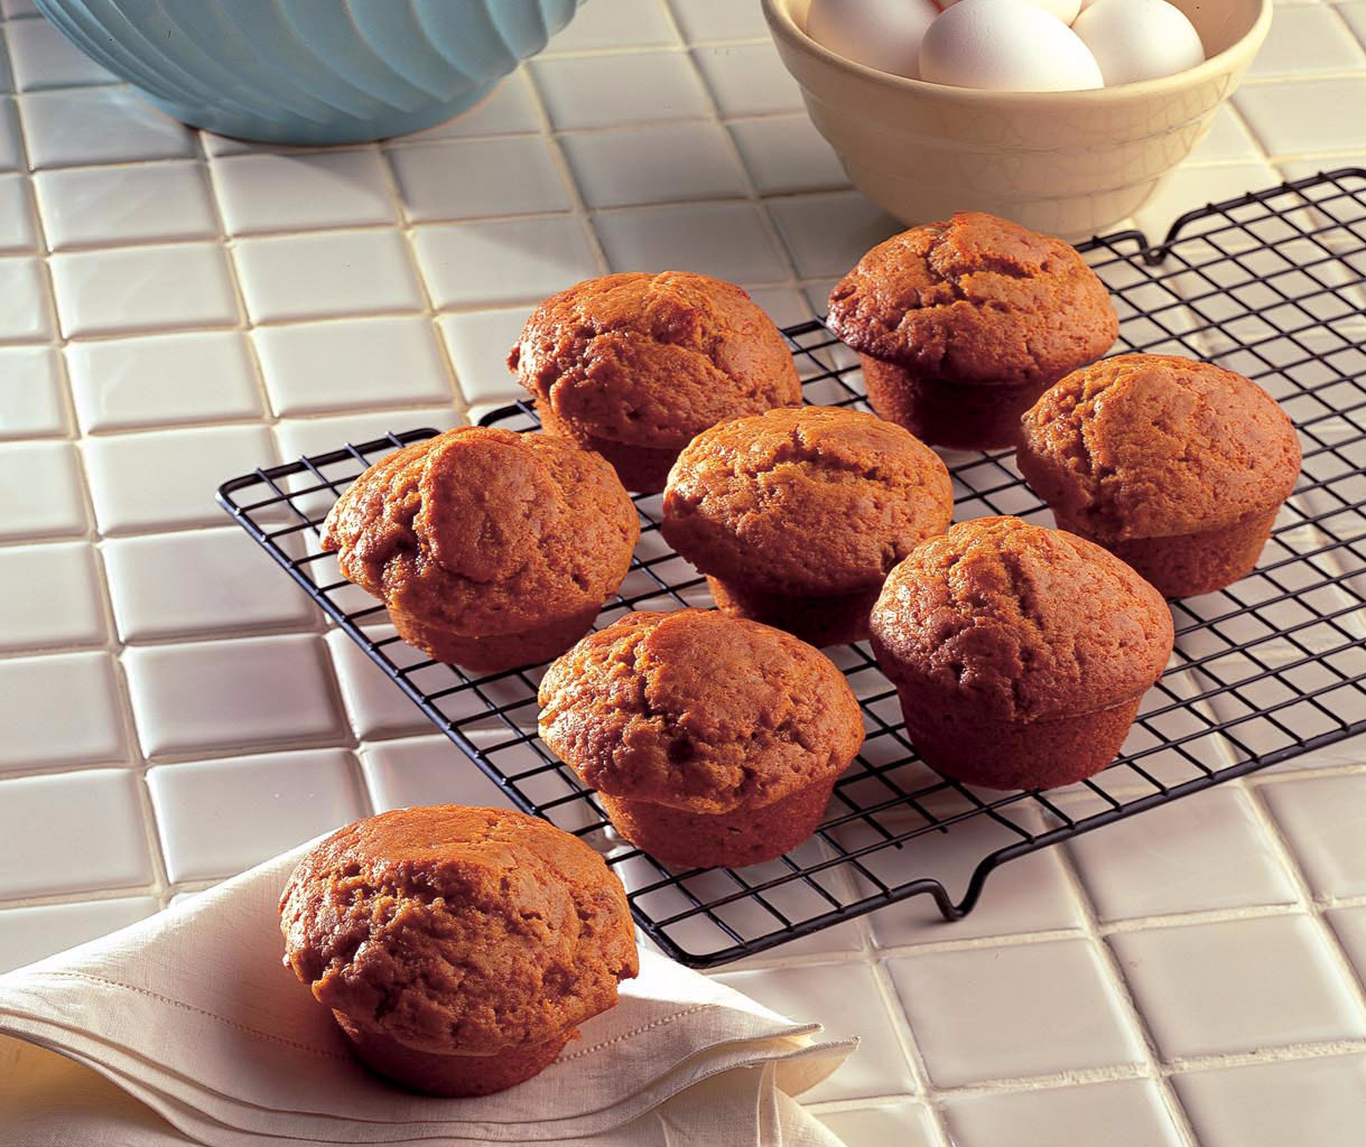 https://images-cdn.welcomesoftware.com/Zz1hYTcwNDRiZDdiMGIwYWY2MmZmMGYxMGUwZmFkYzdmNA==/Seriously%20Simple%3A%20Muffins%20offer%20a%20delicious%20beginning%20for%20the%20new%20year.png?width=1366